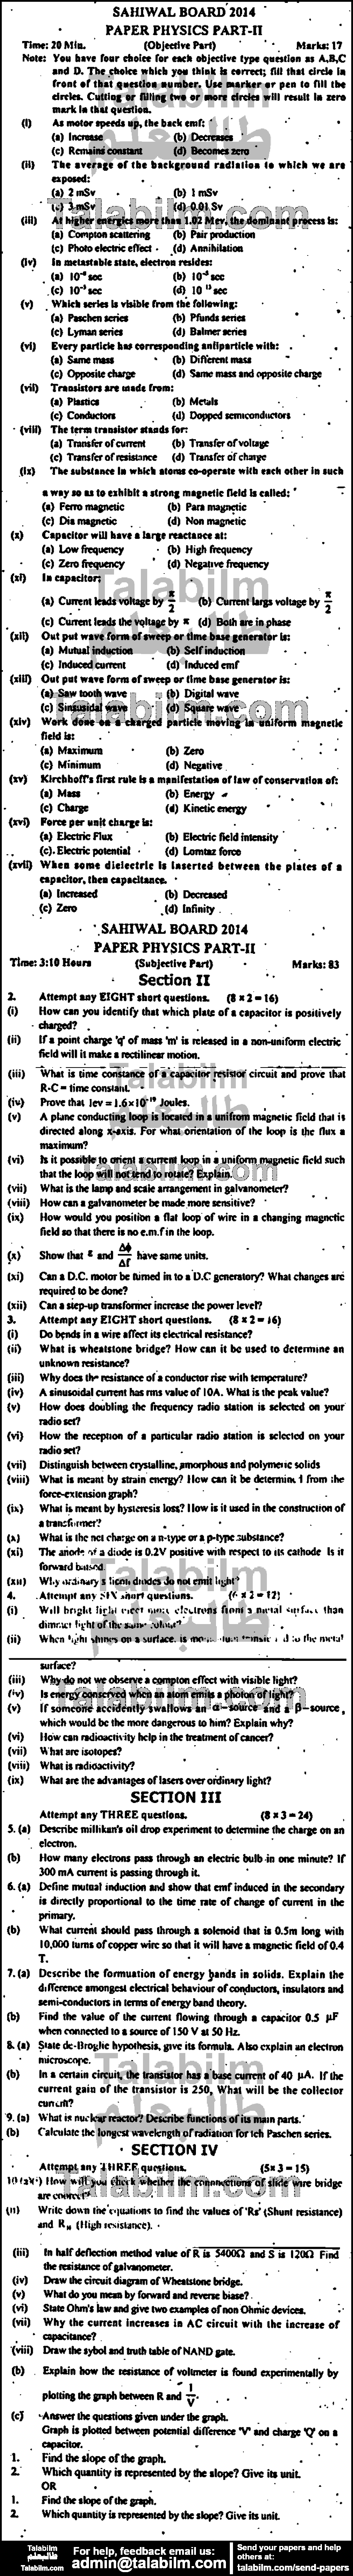 Physics 0 past paper for Group-I 2014